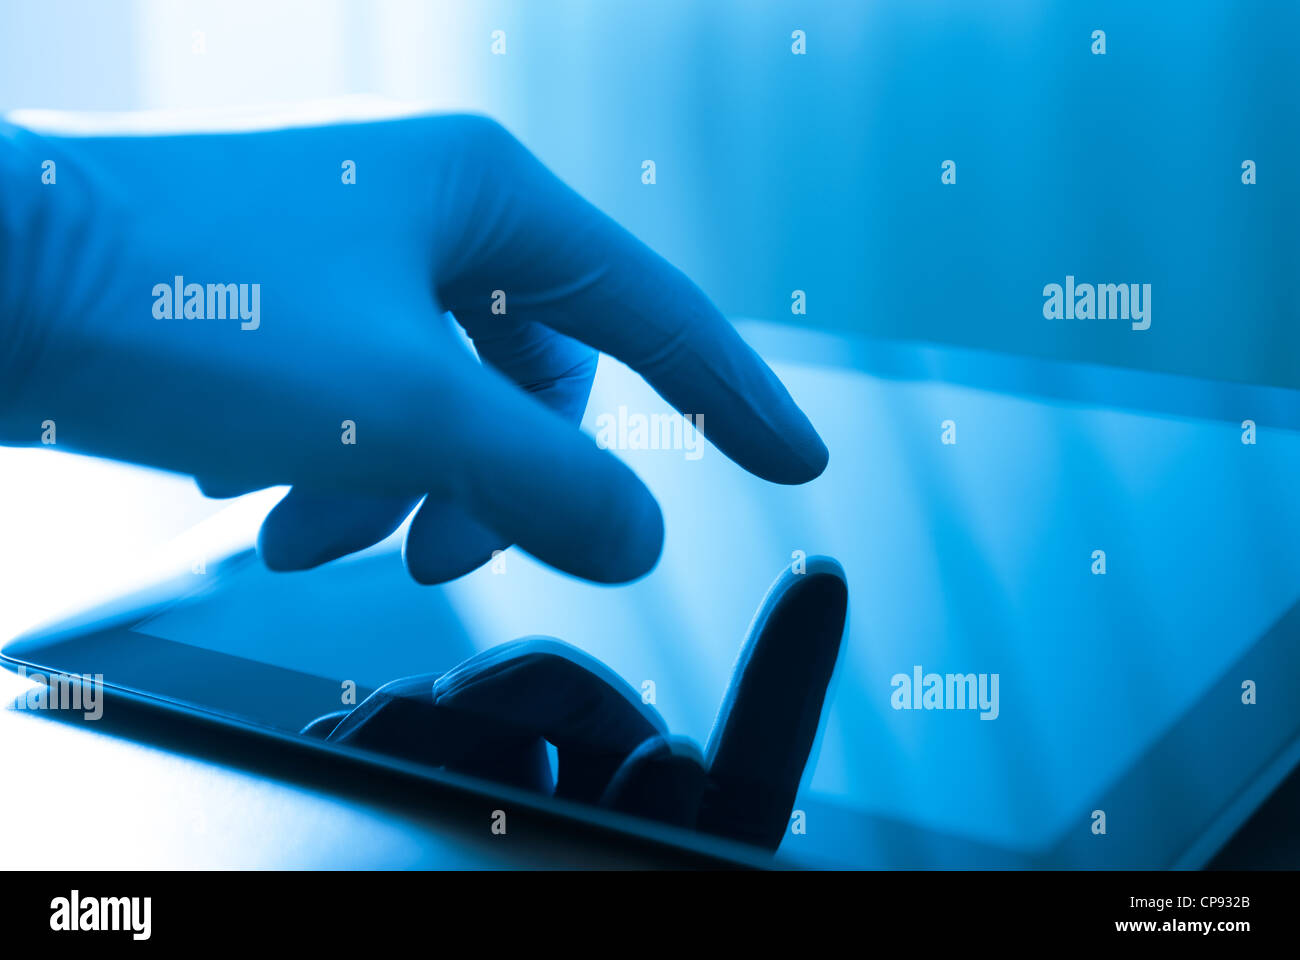 Hand in blue glove touching modern digital tablet. Concept image on medical or research theme. Stock Photo